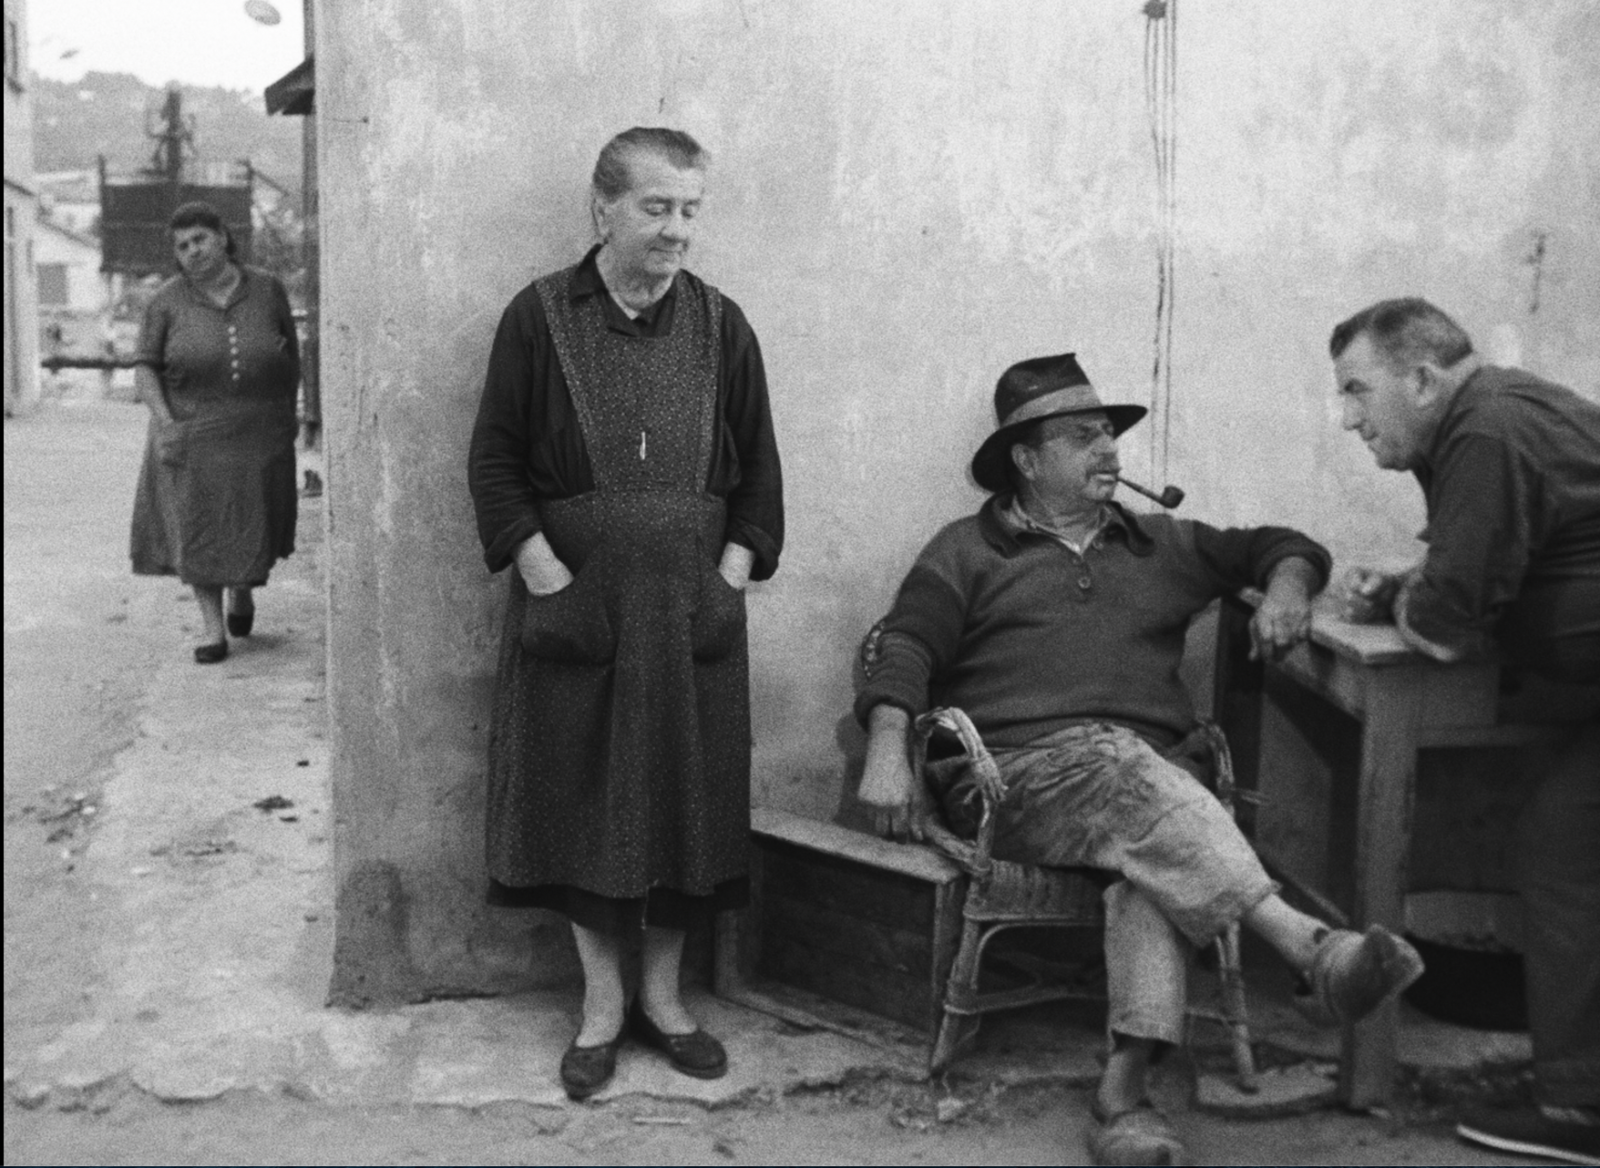 A still from Agnès Varda's 1955 black-and-white film, La Pointe Courte. Four people are outside near a house in a French village. On the right-hand side of the photo, two men chat. One leans in from the right edge of the frame, his arms resting on a table. He's only partially visible. The other sits on a worn wicker chair, his legs crossed. He has a mustache, is smoking a pipe, and wears a hat, grimy pants, and wooden clogs. An older woman in a smock stands to his left, listening. A woman in the background walks toward them.